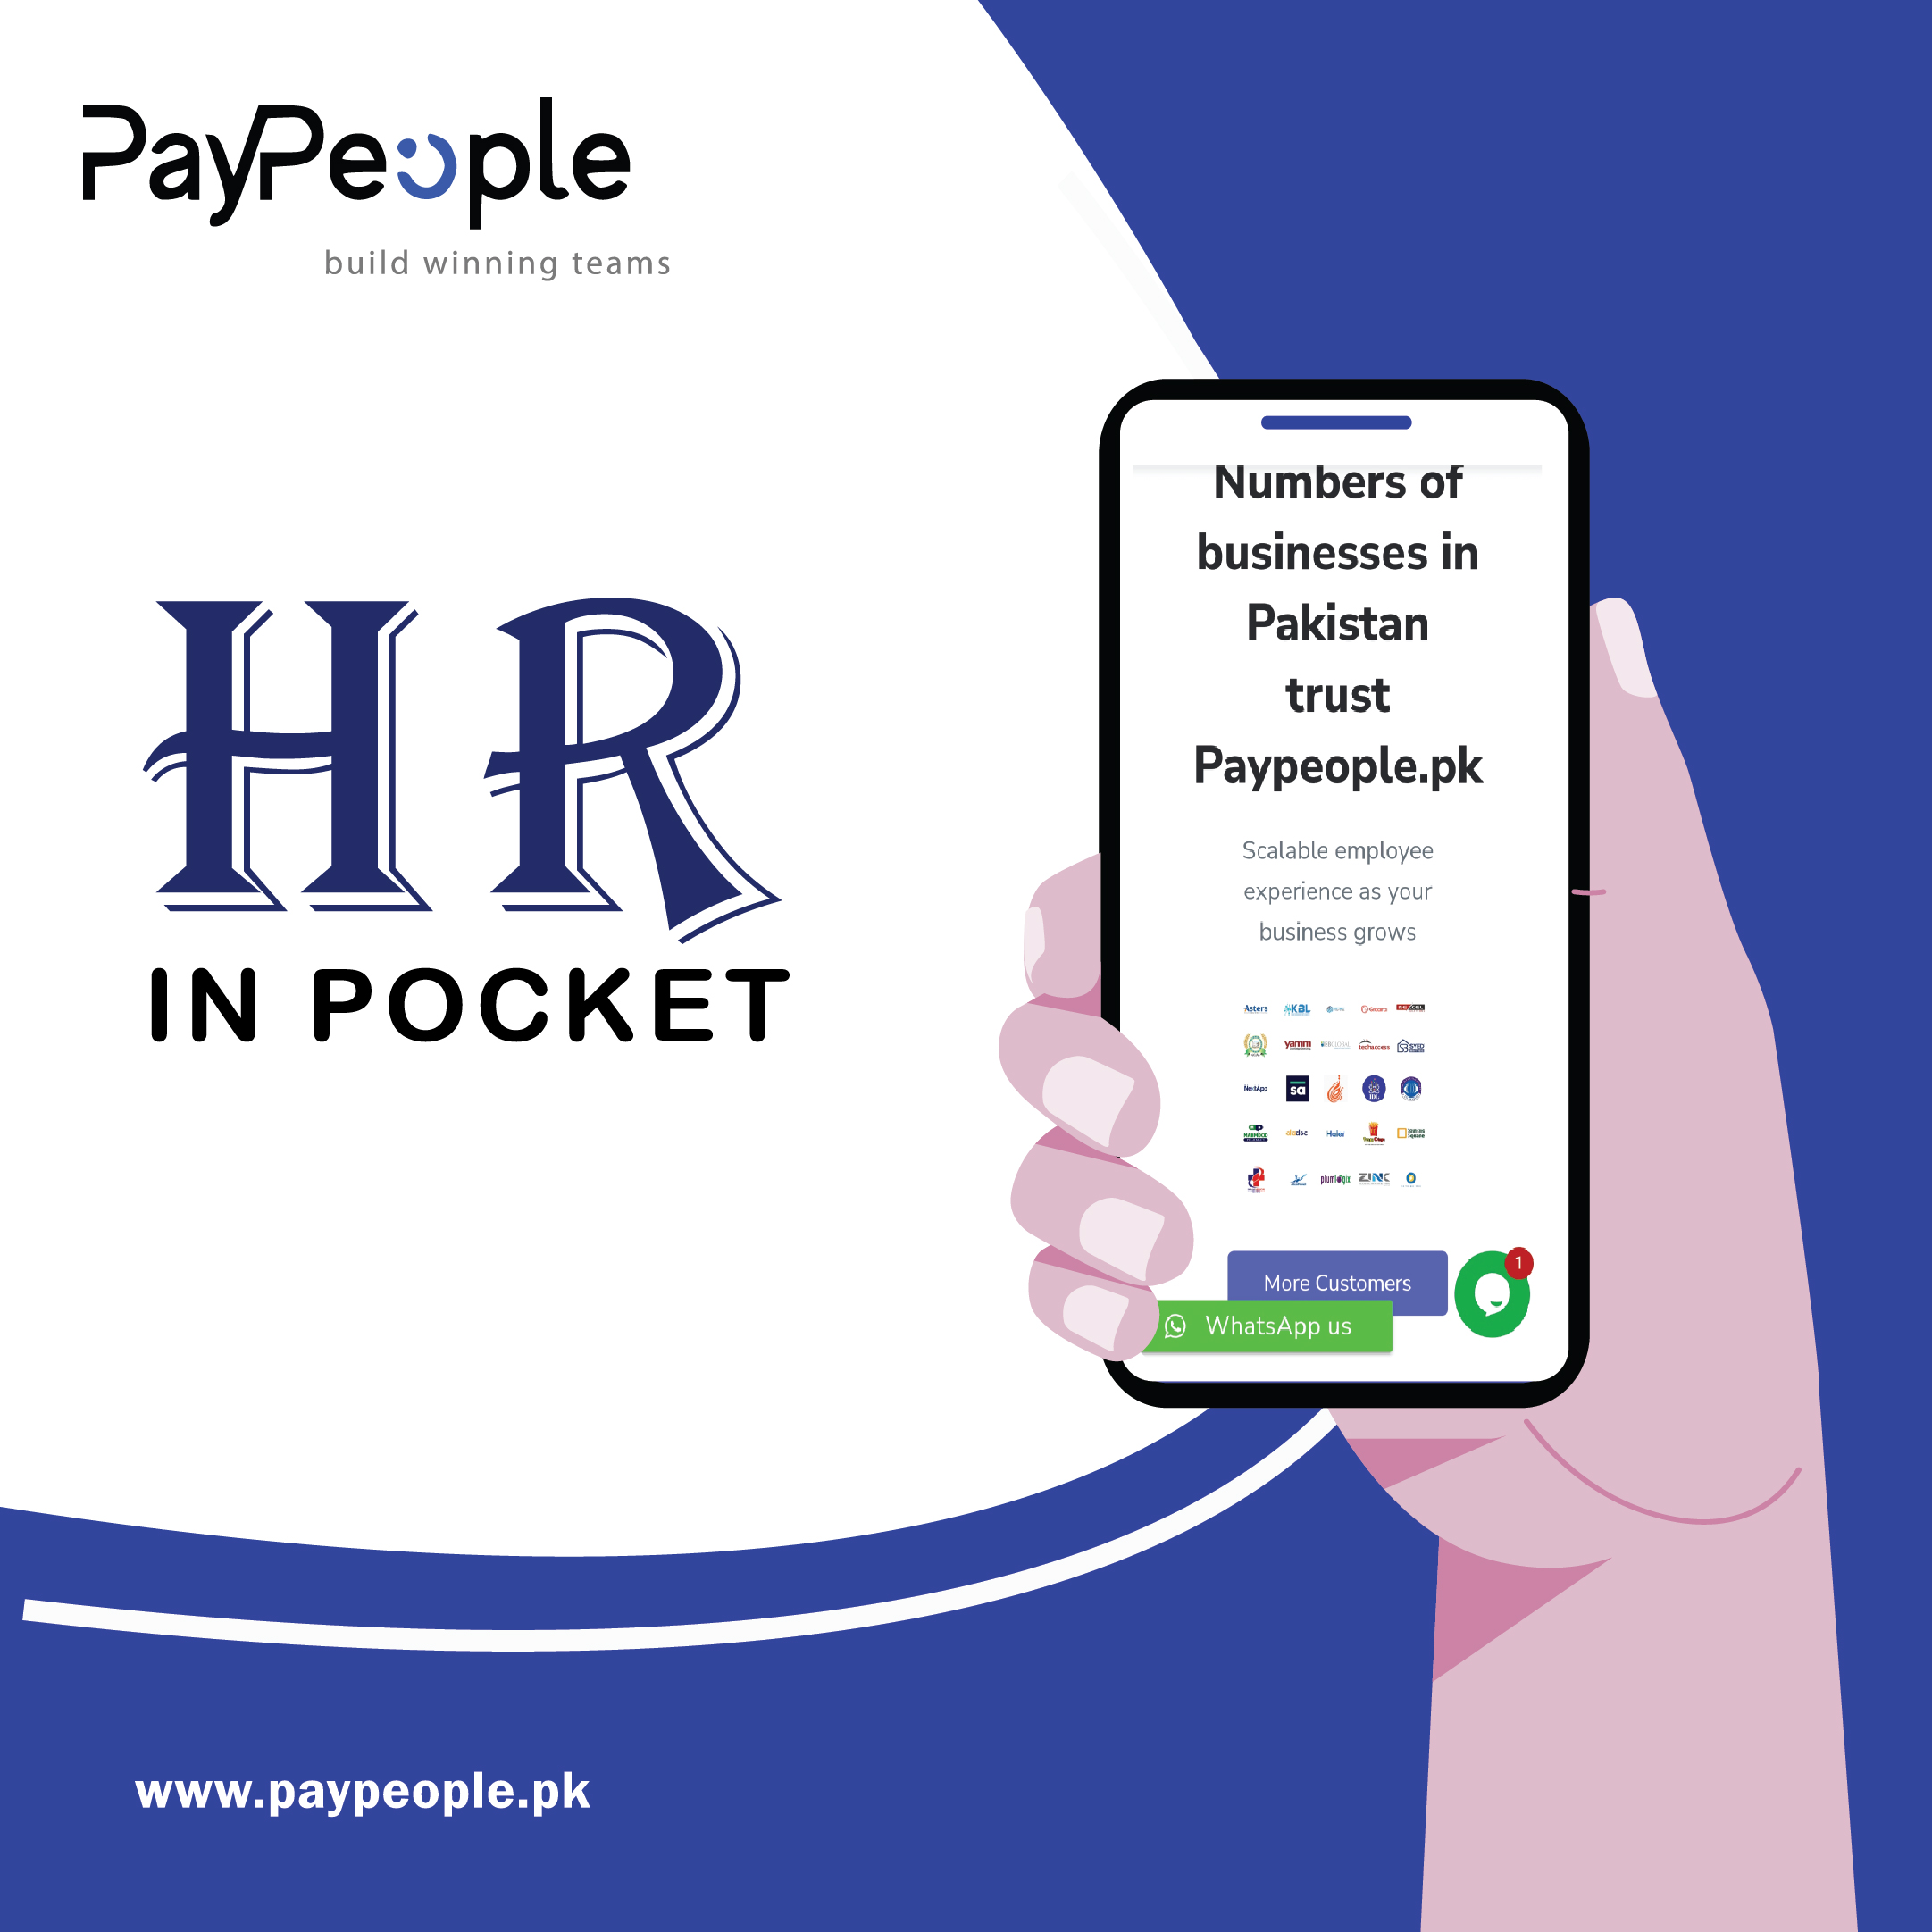 What are the key features of HR Software in Pakistan?